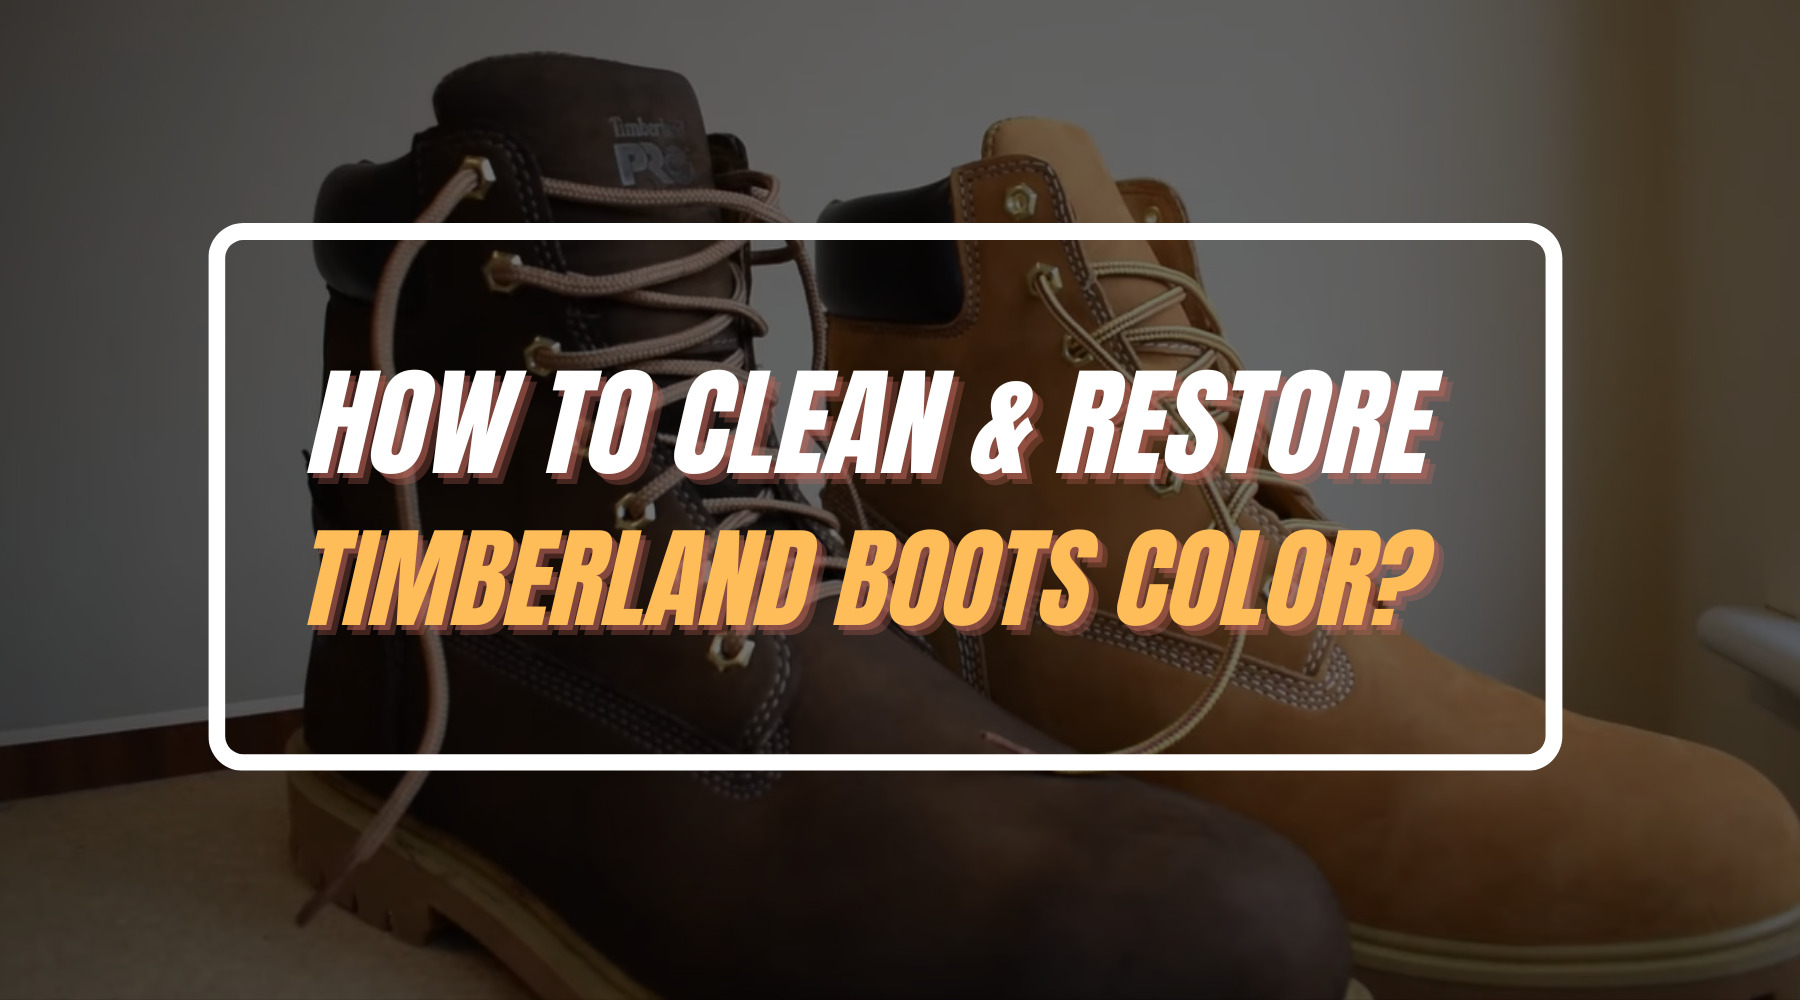 How To Clean & Restore Timberland Boots Color